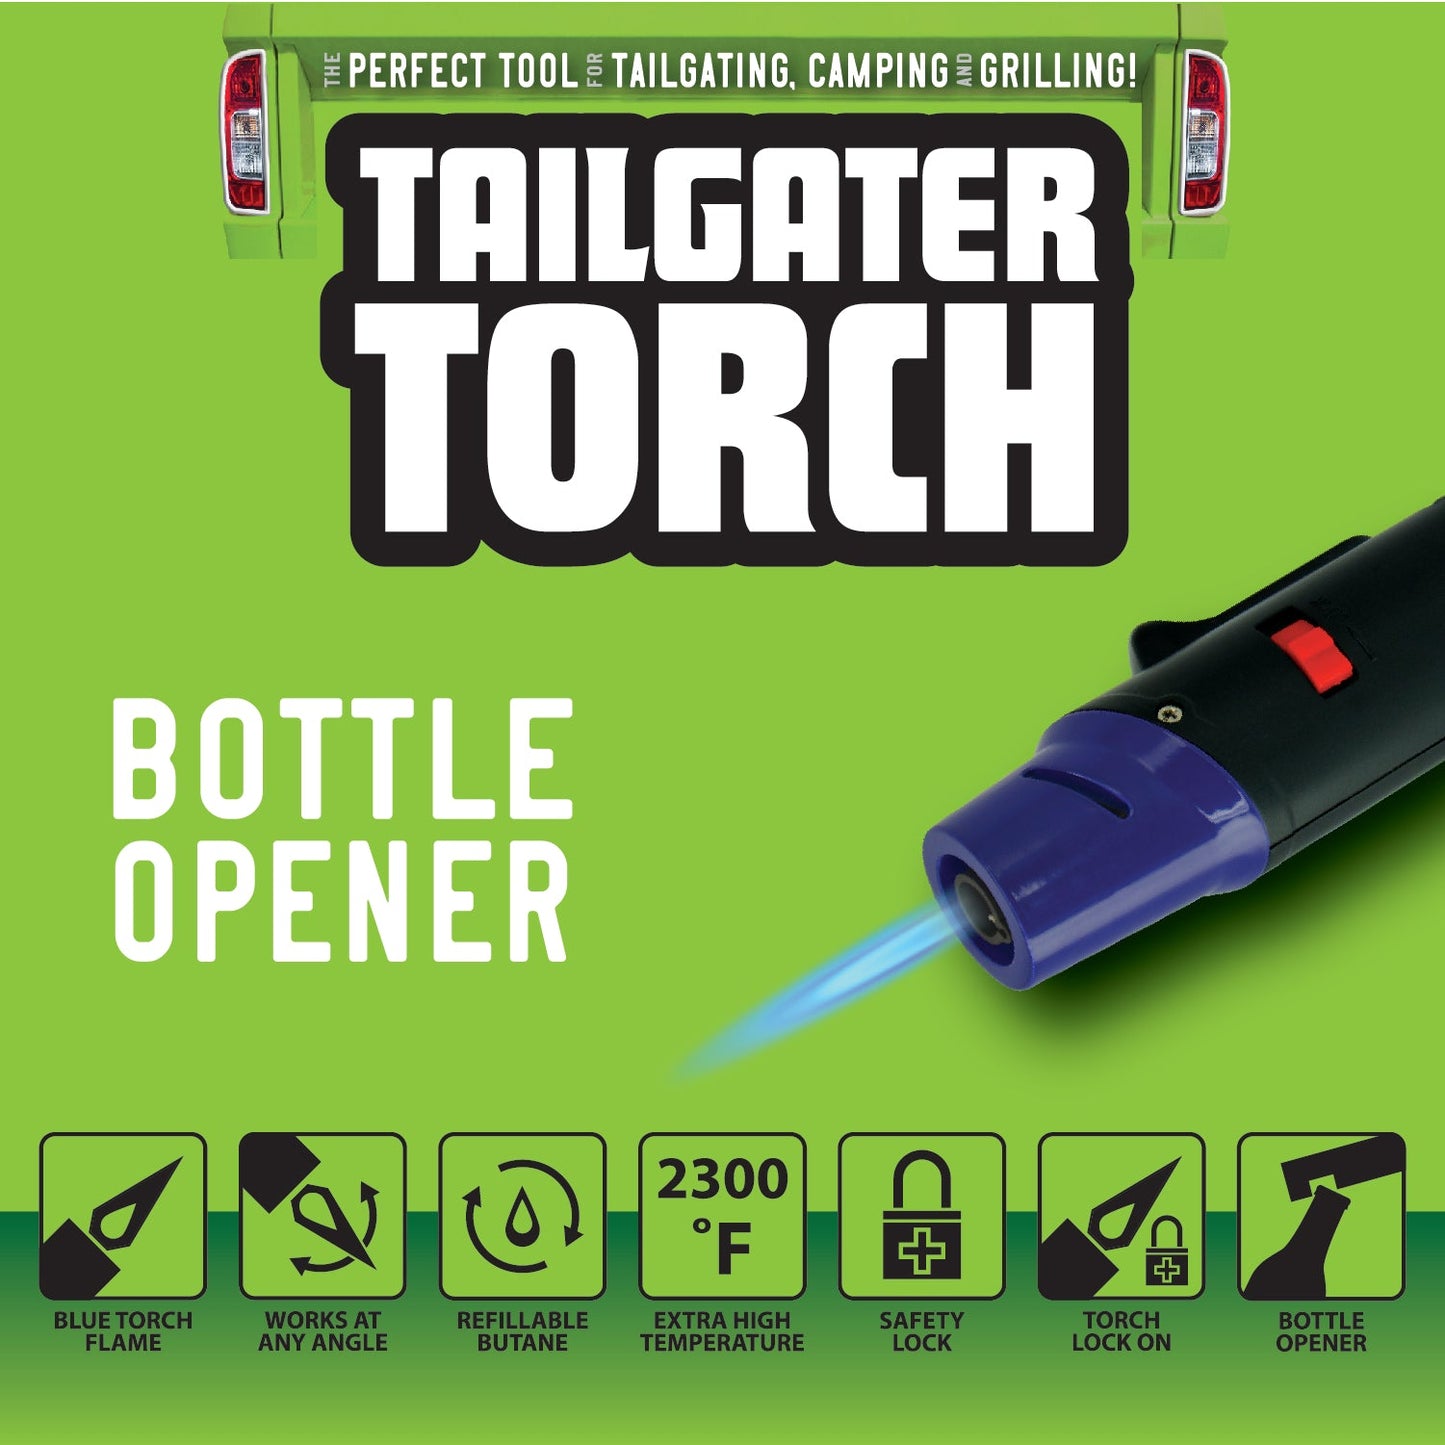 ITEM NUMBER 041378 TAILGATER TORCH 8 PIECES PER DISPLAY